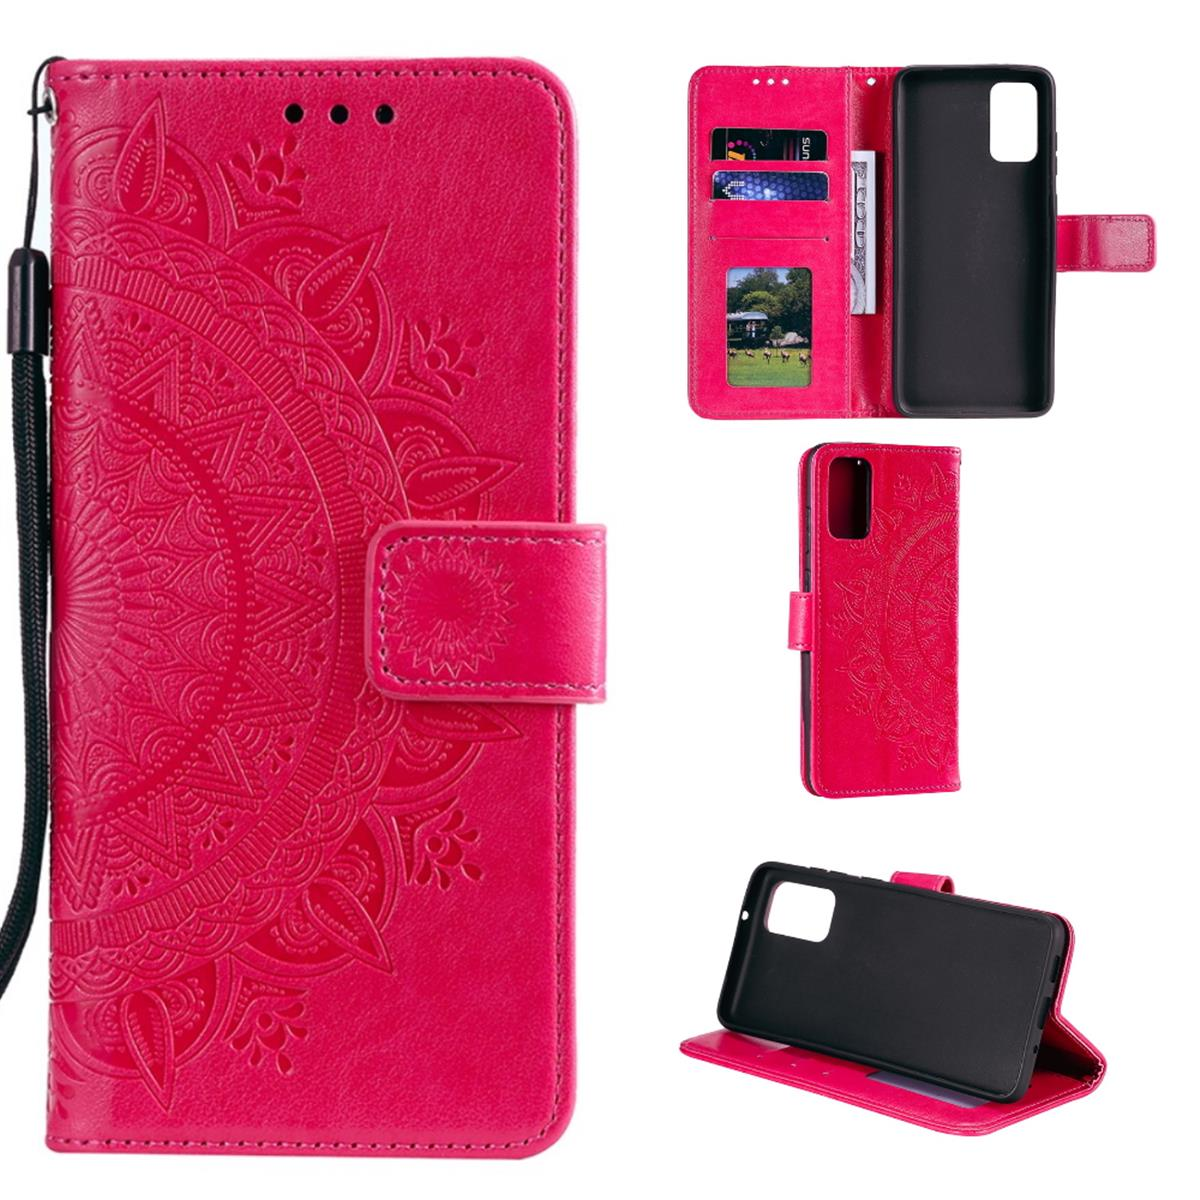 COVERKINGZ Klapphülle mit Mandala P40 Huawei, Bookcover, Muster, Pink Pro